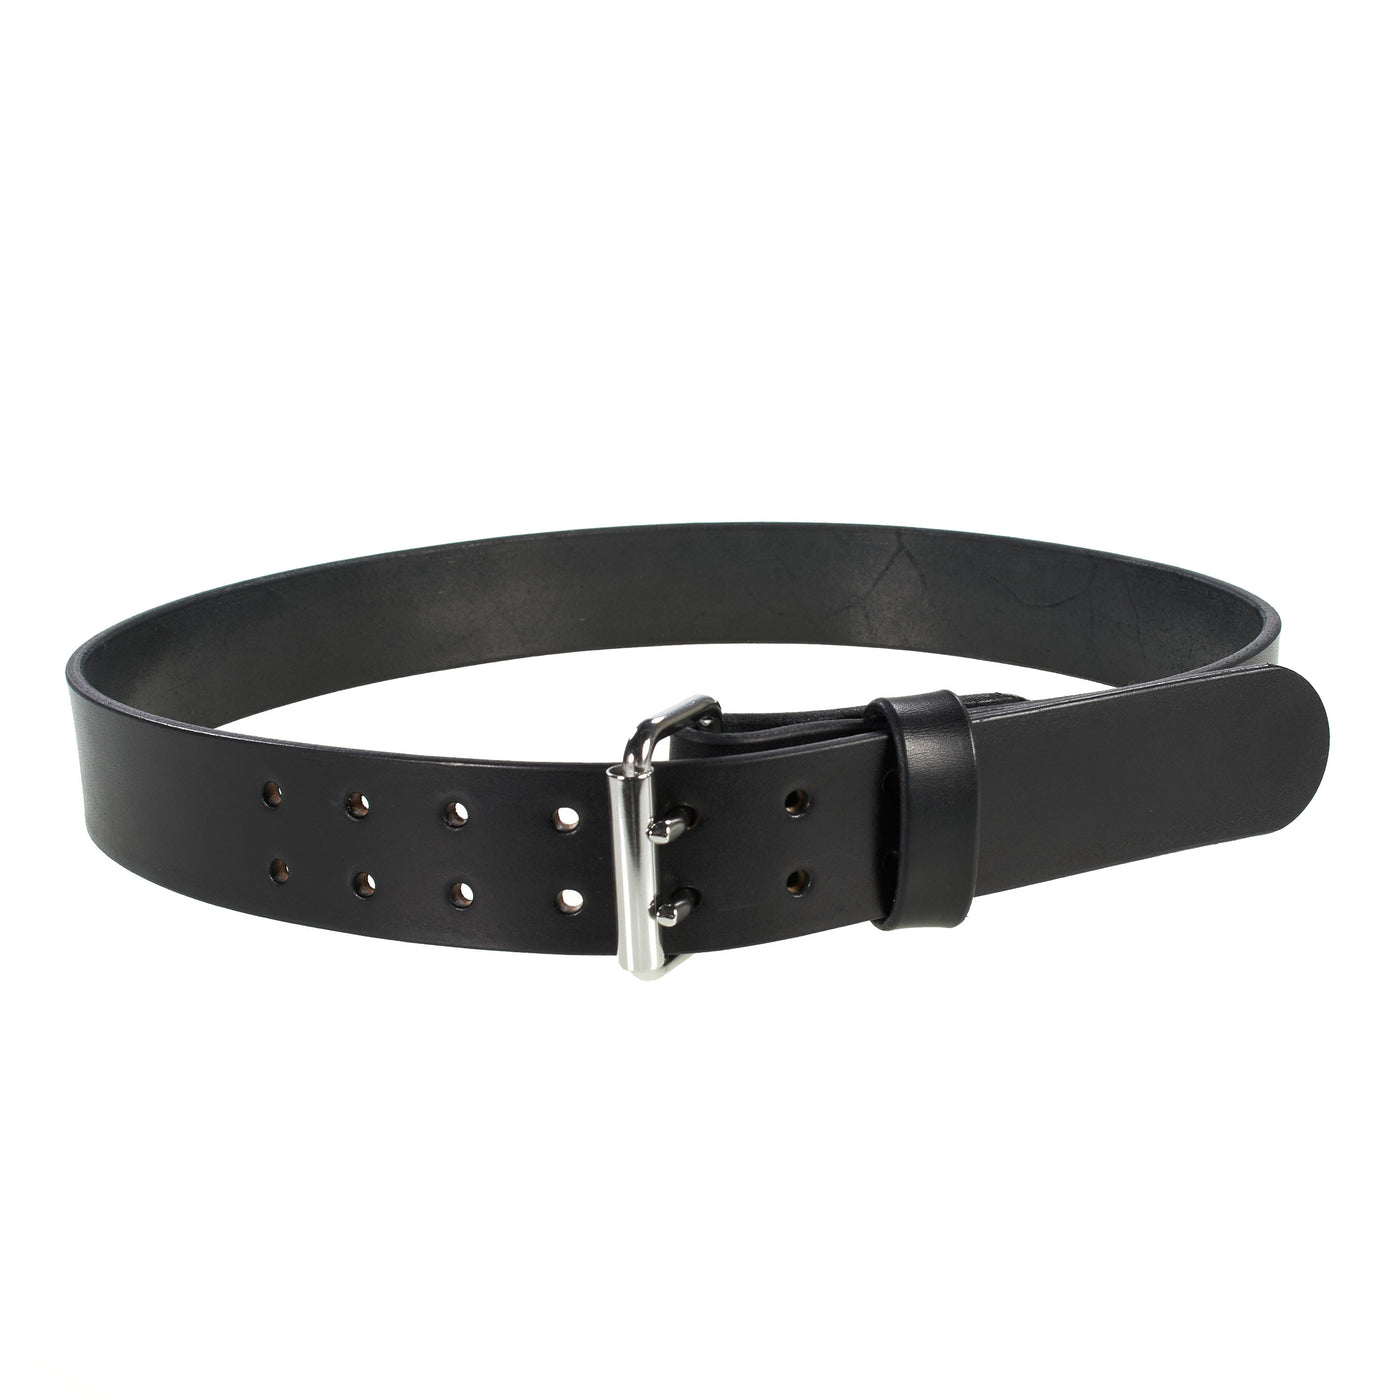 The Grizzly - 2" Wide Double Prong Full Grain Leather Belt